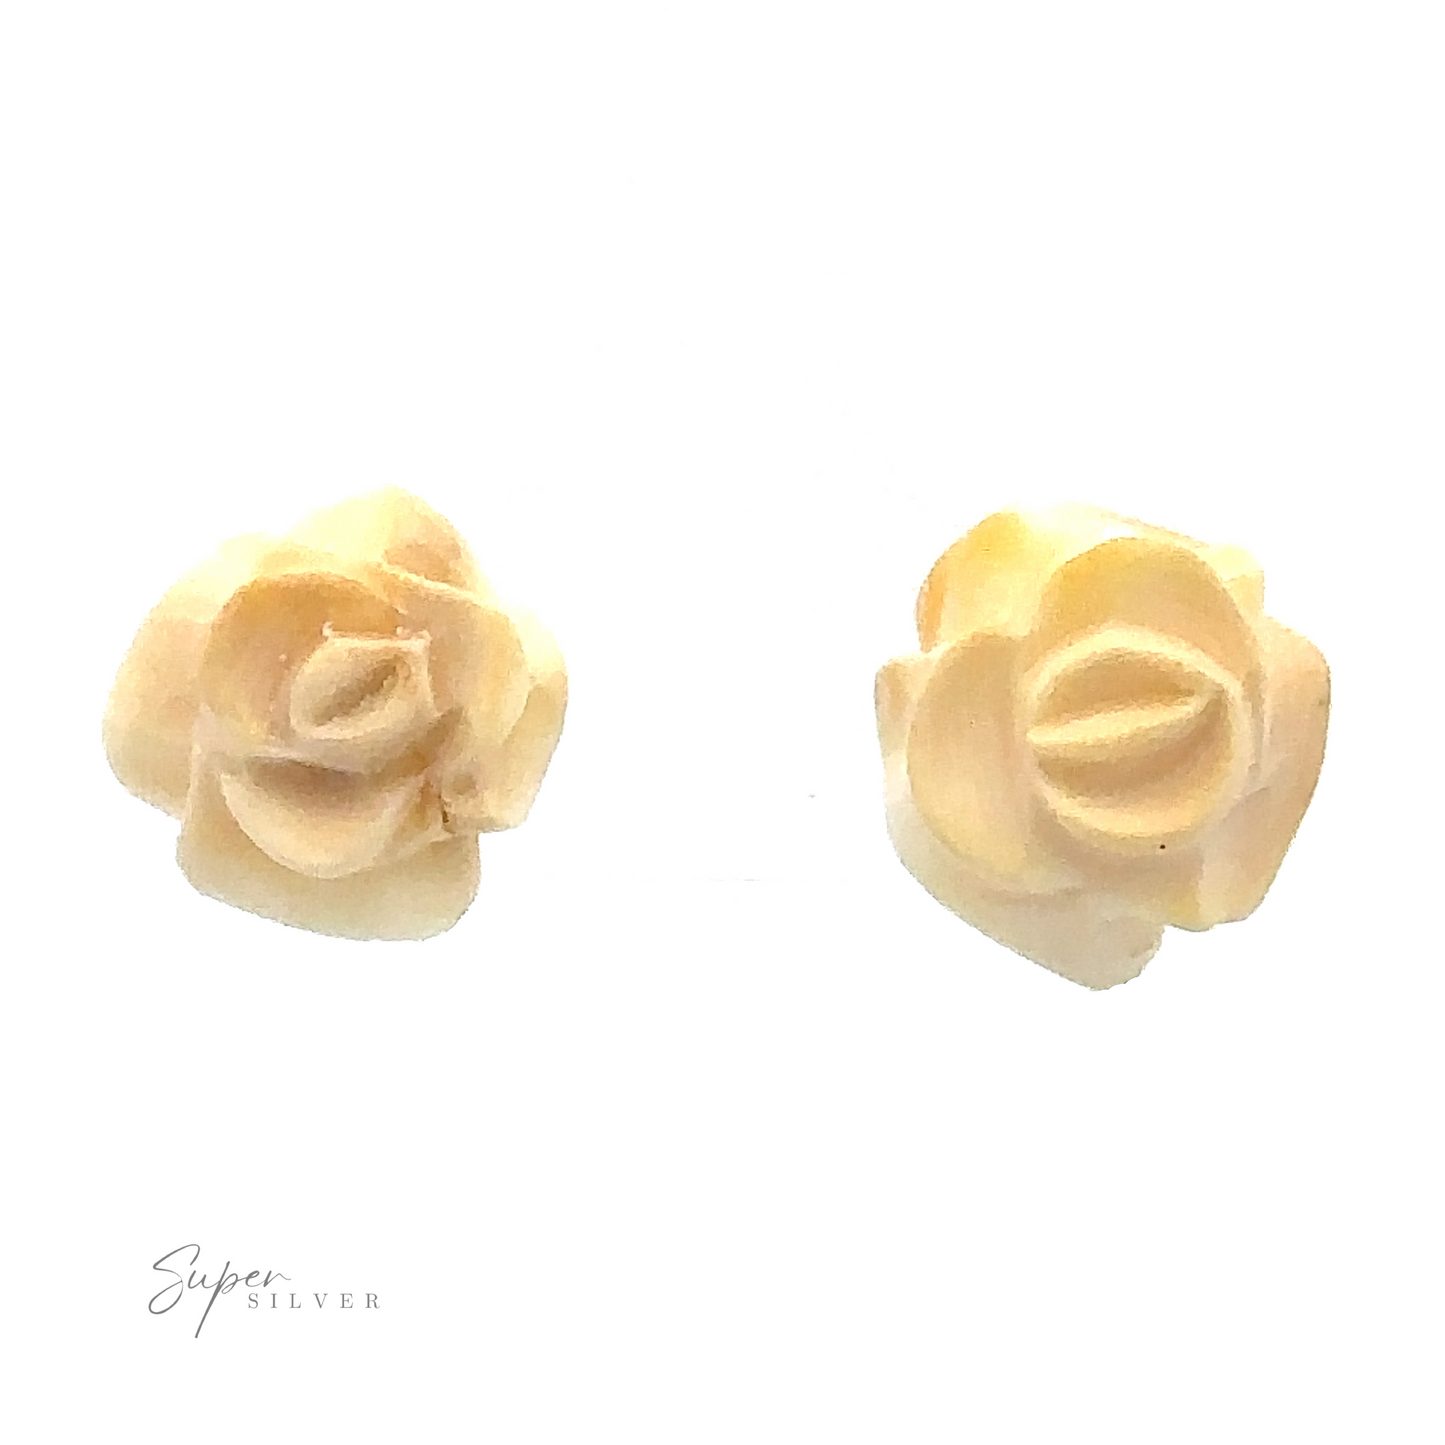 
                  
                    A pair of Butterscotch Amber Rose Studs made from a light-colored material against a white background. Super Silver logo at the bottom left corner.
                  
                